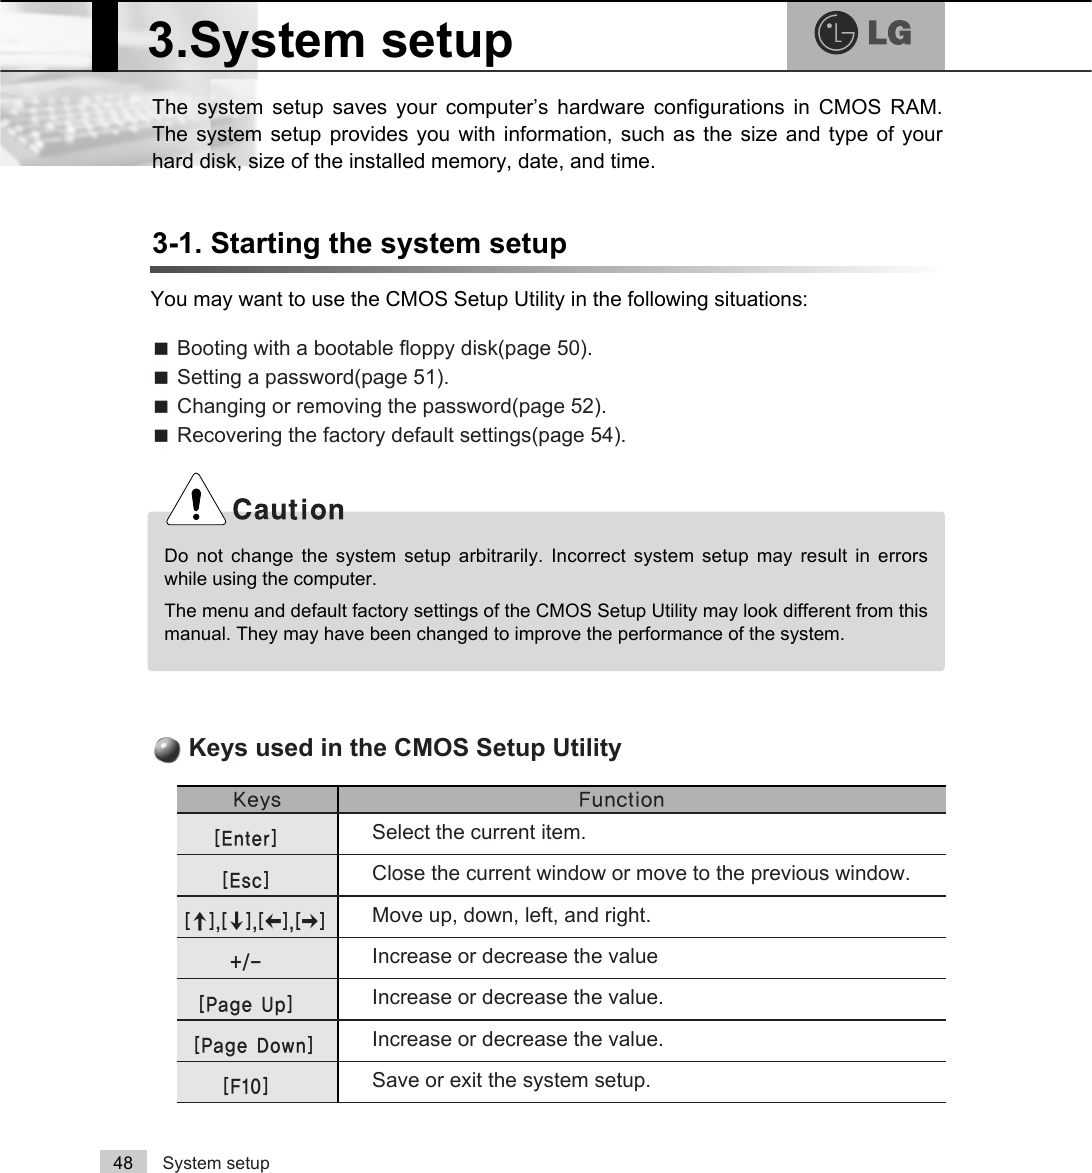 System setup48The system setup saves your computer’s hardware configurations in CMOS RAM.The system setup provides you with information, such as the size and type of yourhard disk, size of the installed memory, date, and time.3-1. Starting the system setupYou may want to use the CMOS Setup Utility in the following situations:ãBooting with a bootable floppy disk(page 50).ãSetting a password(page 51).ãChanging or removing the password(page 52).ãRecovering the factory default settings(page 54).Do not change the system setup arbitrarily. Incorrect system setup may result in errorswhile using the computer.The menu and default factory settings of the CMOS Setup Utility may look different from thismanual. They may have been changed to improve the performance of the system..H\V )XQFWLRQSelect the current item.&gt;(QWHU@Close the current window or move to the previous window.&gt;(VF@Move up, down, left, and right.&gt;Ⓑ@&gt;Ⓒ@&gt;⒵@&gt;Ⓐ@Increase or decrease the valueIncrease or decrease the value.Increase or decrease the value.Save or exit the system setup.&gt;3DJH8S@&gt;3DJH&apos;RZQ@&gt;)@Keys used in the CMOS Setup Utility3.System setup